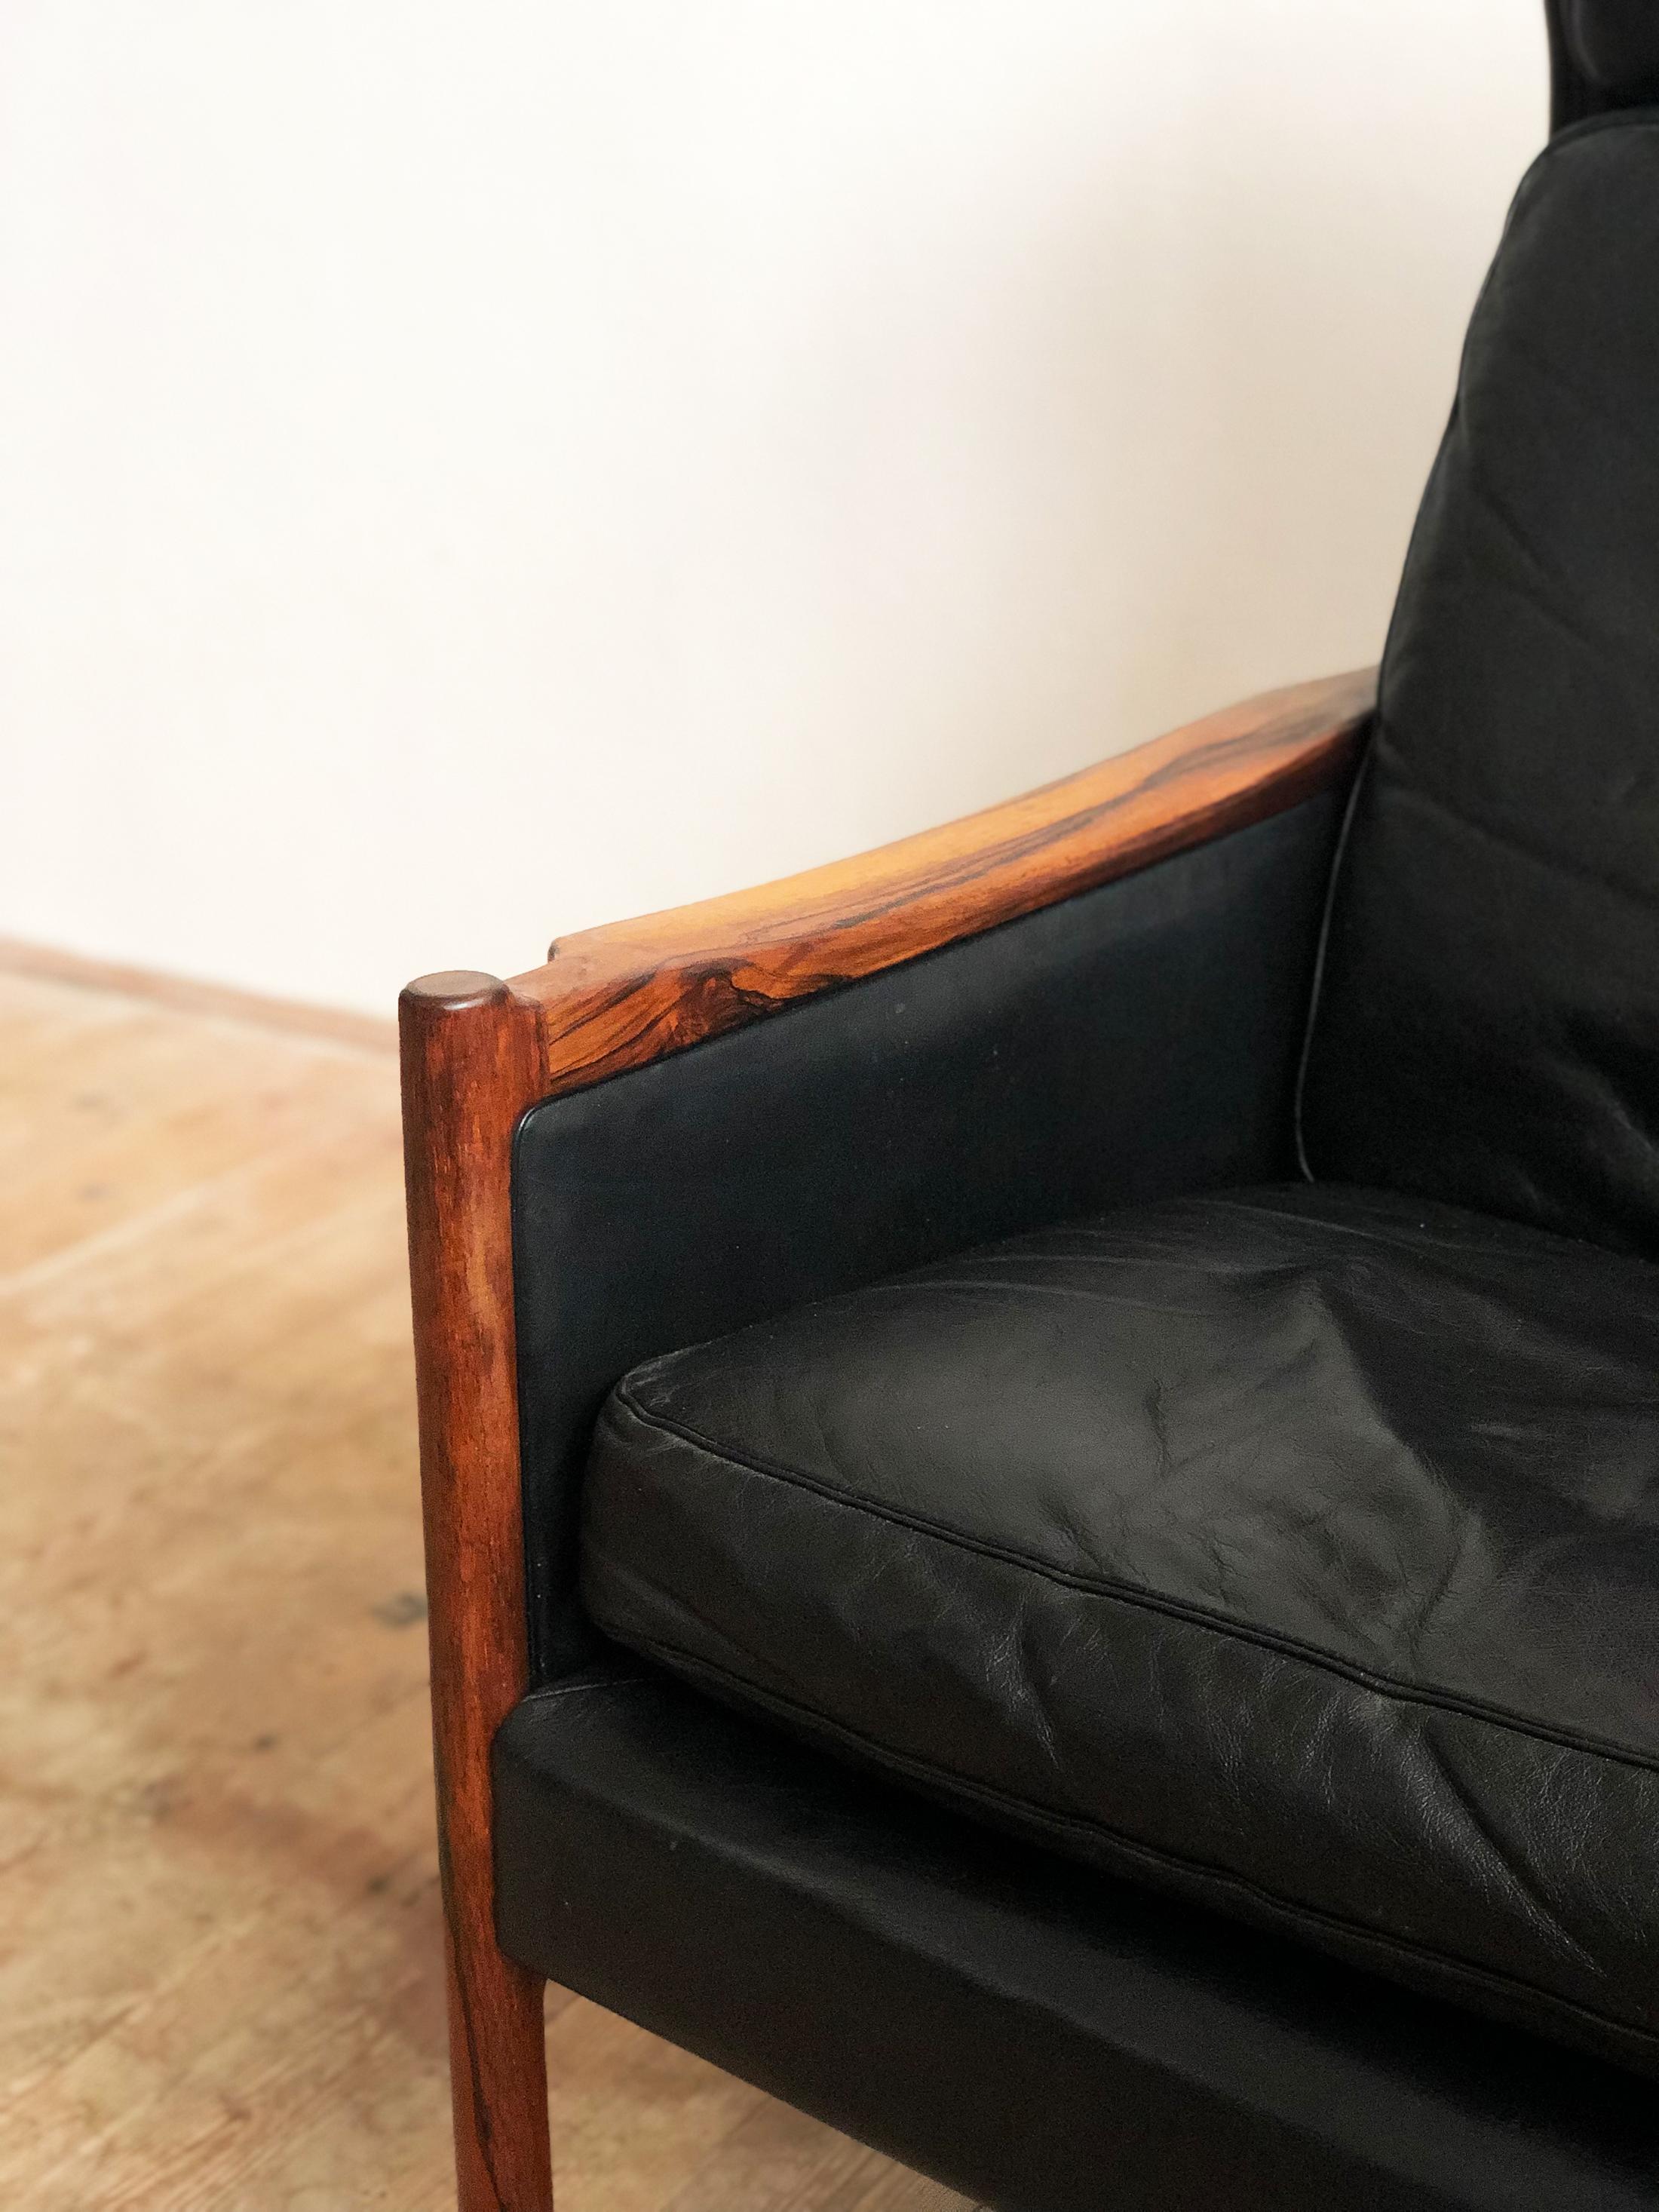 Danish Mid-Century Modern Rosewood and Black Leather Lounge Chair For Sale 7